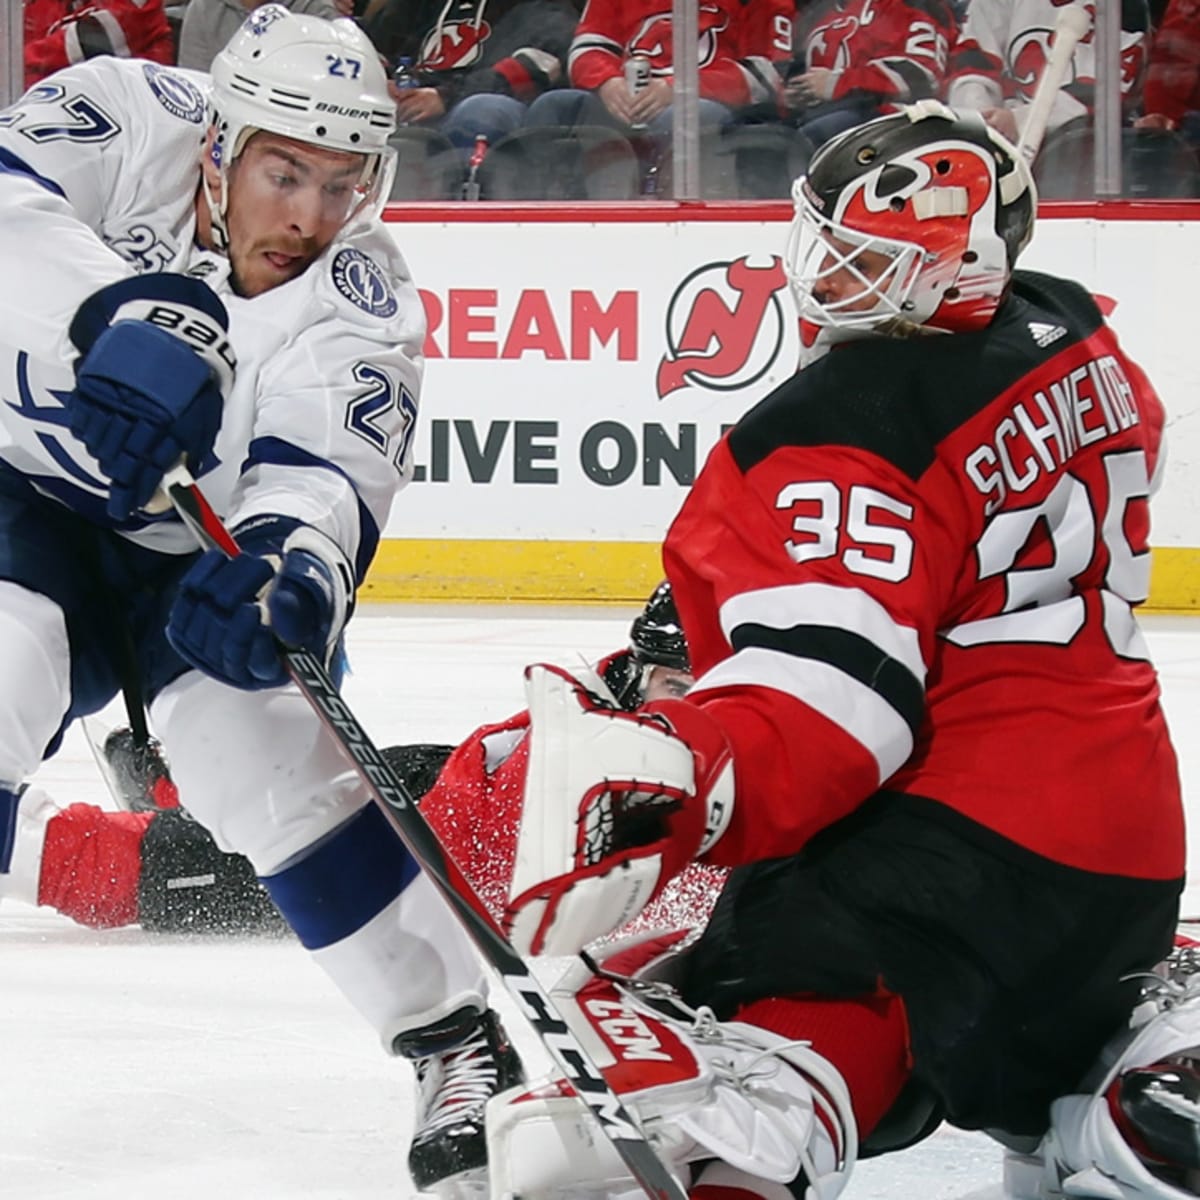 New Jersey Devils: Hopefully Brian Boyle Can Return For His Night